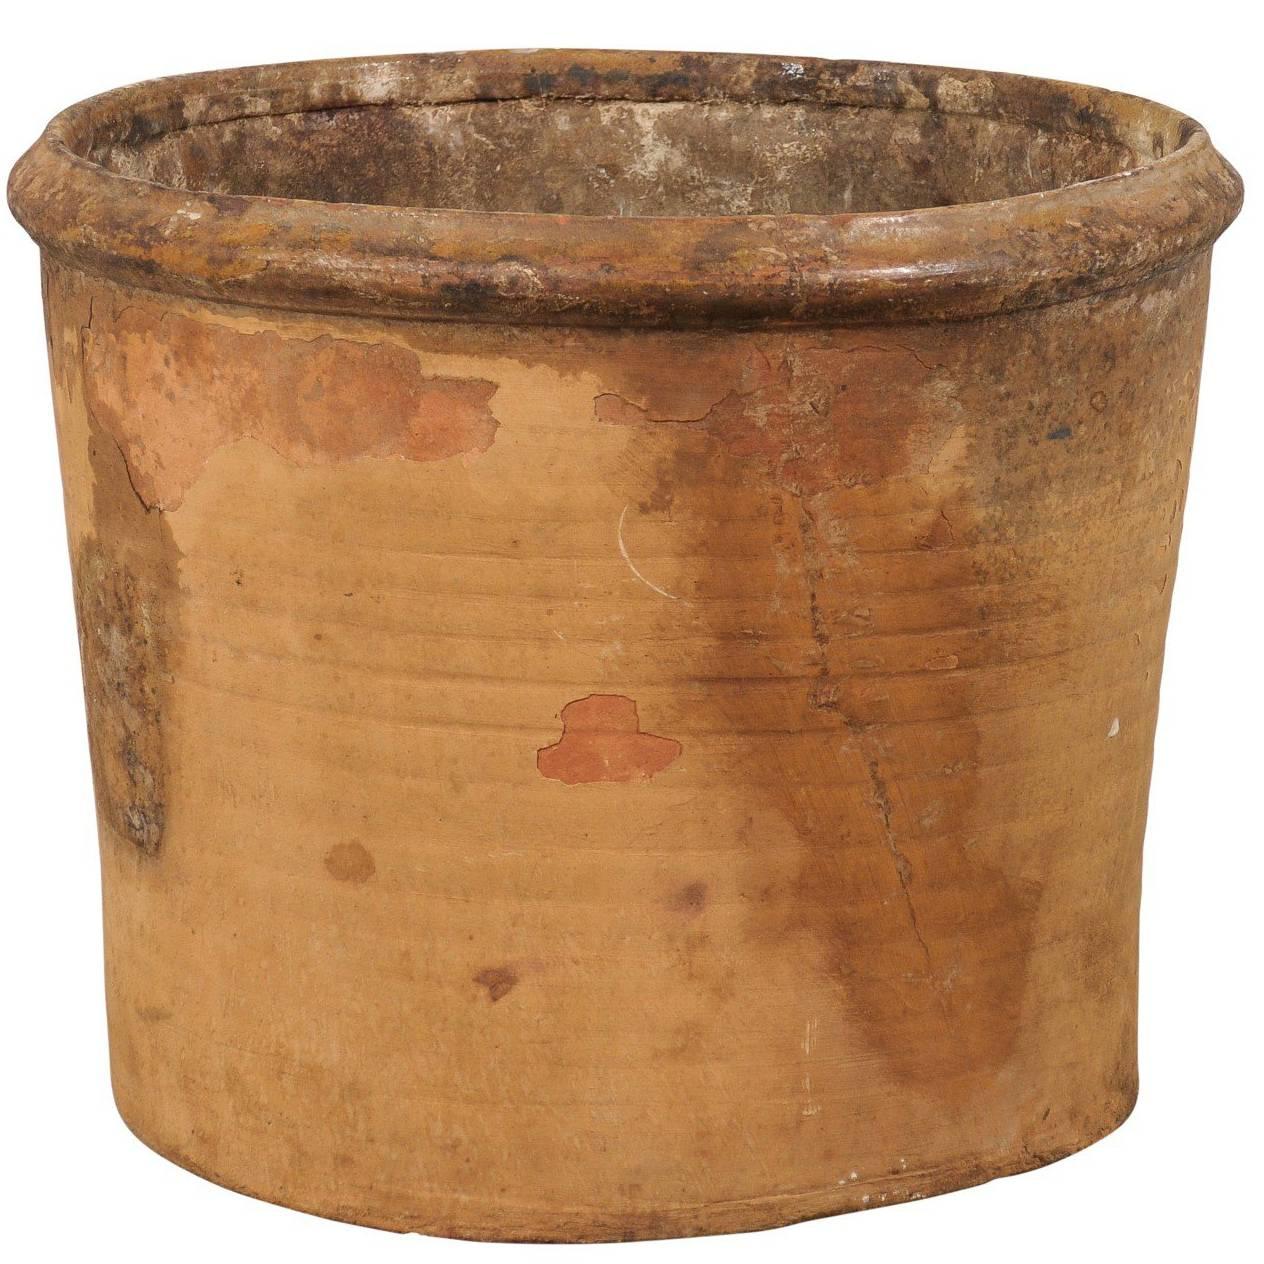 19th Century Spanish Clay Pot with a Spout at the Base